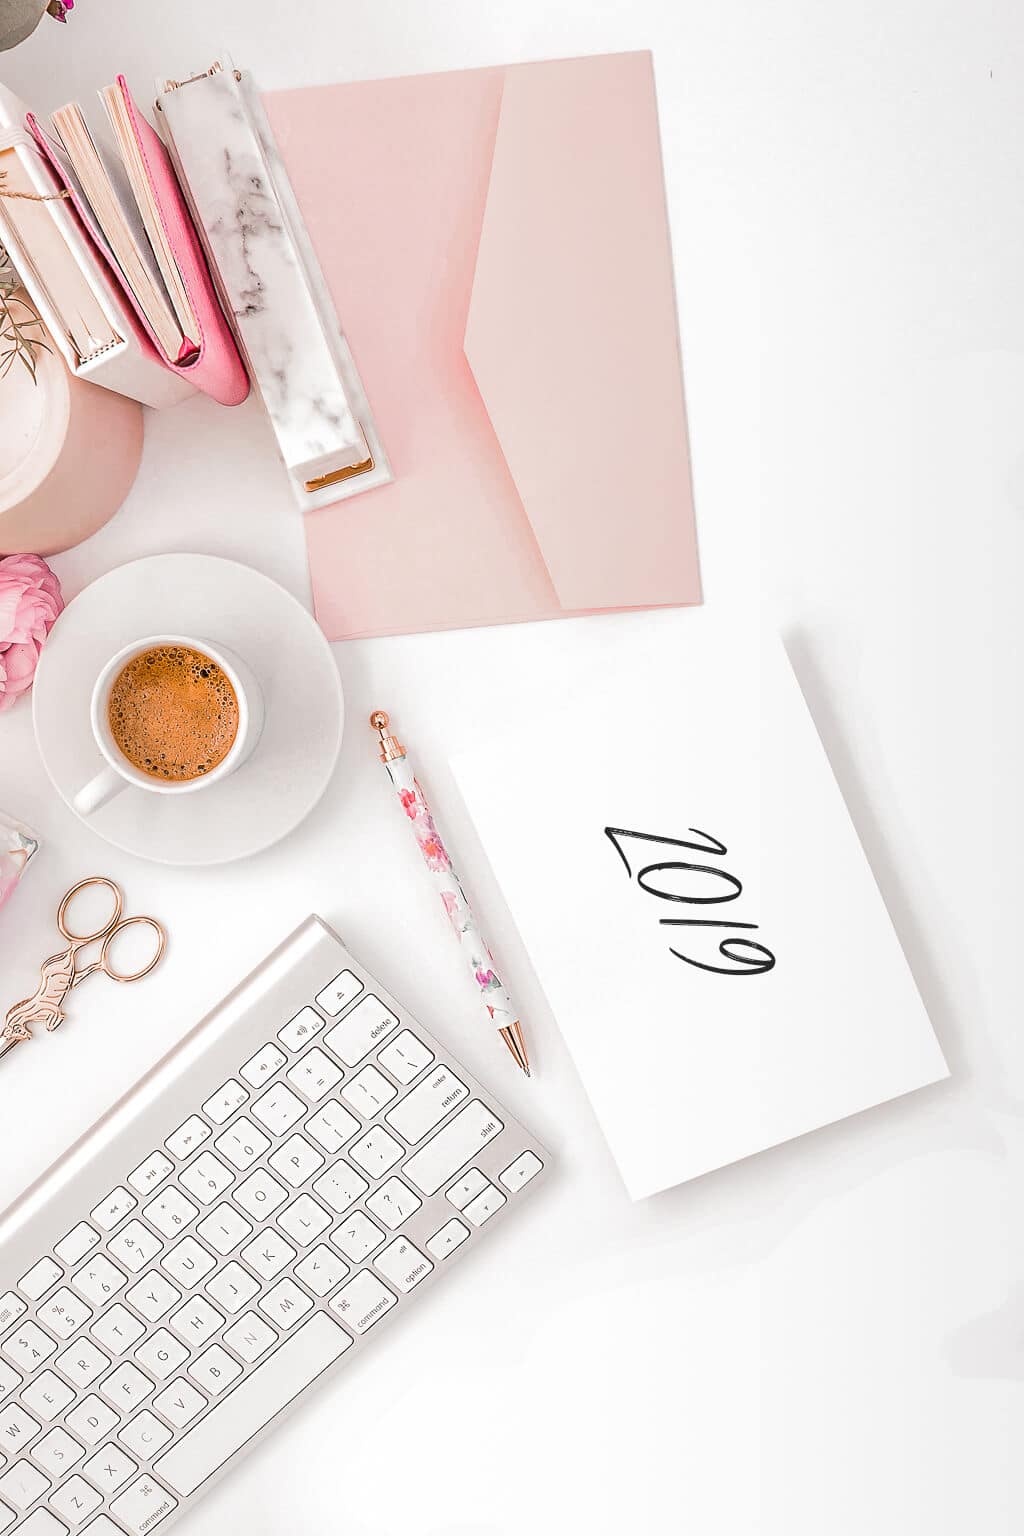 Looking for ways to improve your blog for the upcoming year? Here are some ways for you to make your blog better for 2019. #blogging #blogging_tips